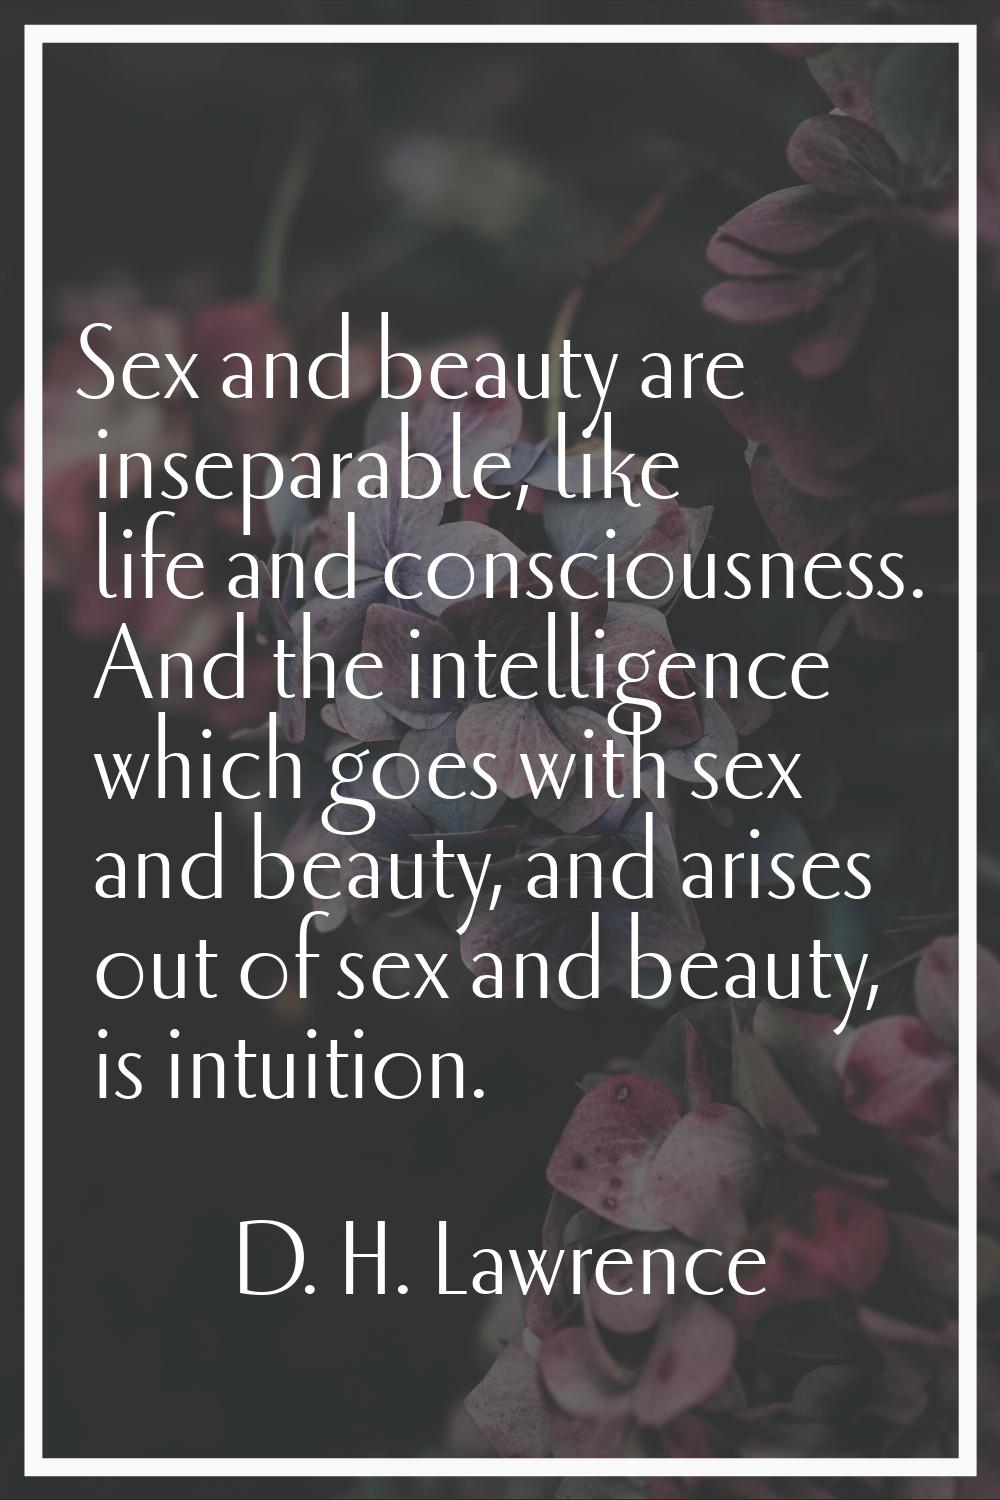 Sex and beauty are inseparable, like life and consciousness. And the intelligence which goes with s